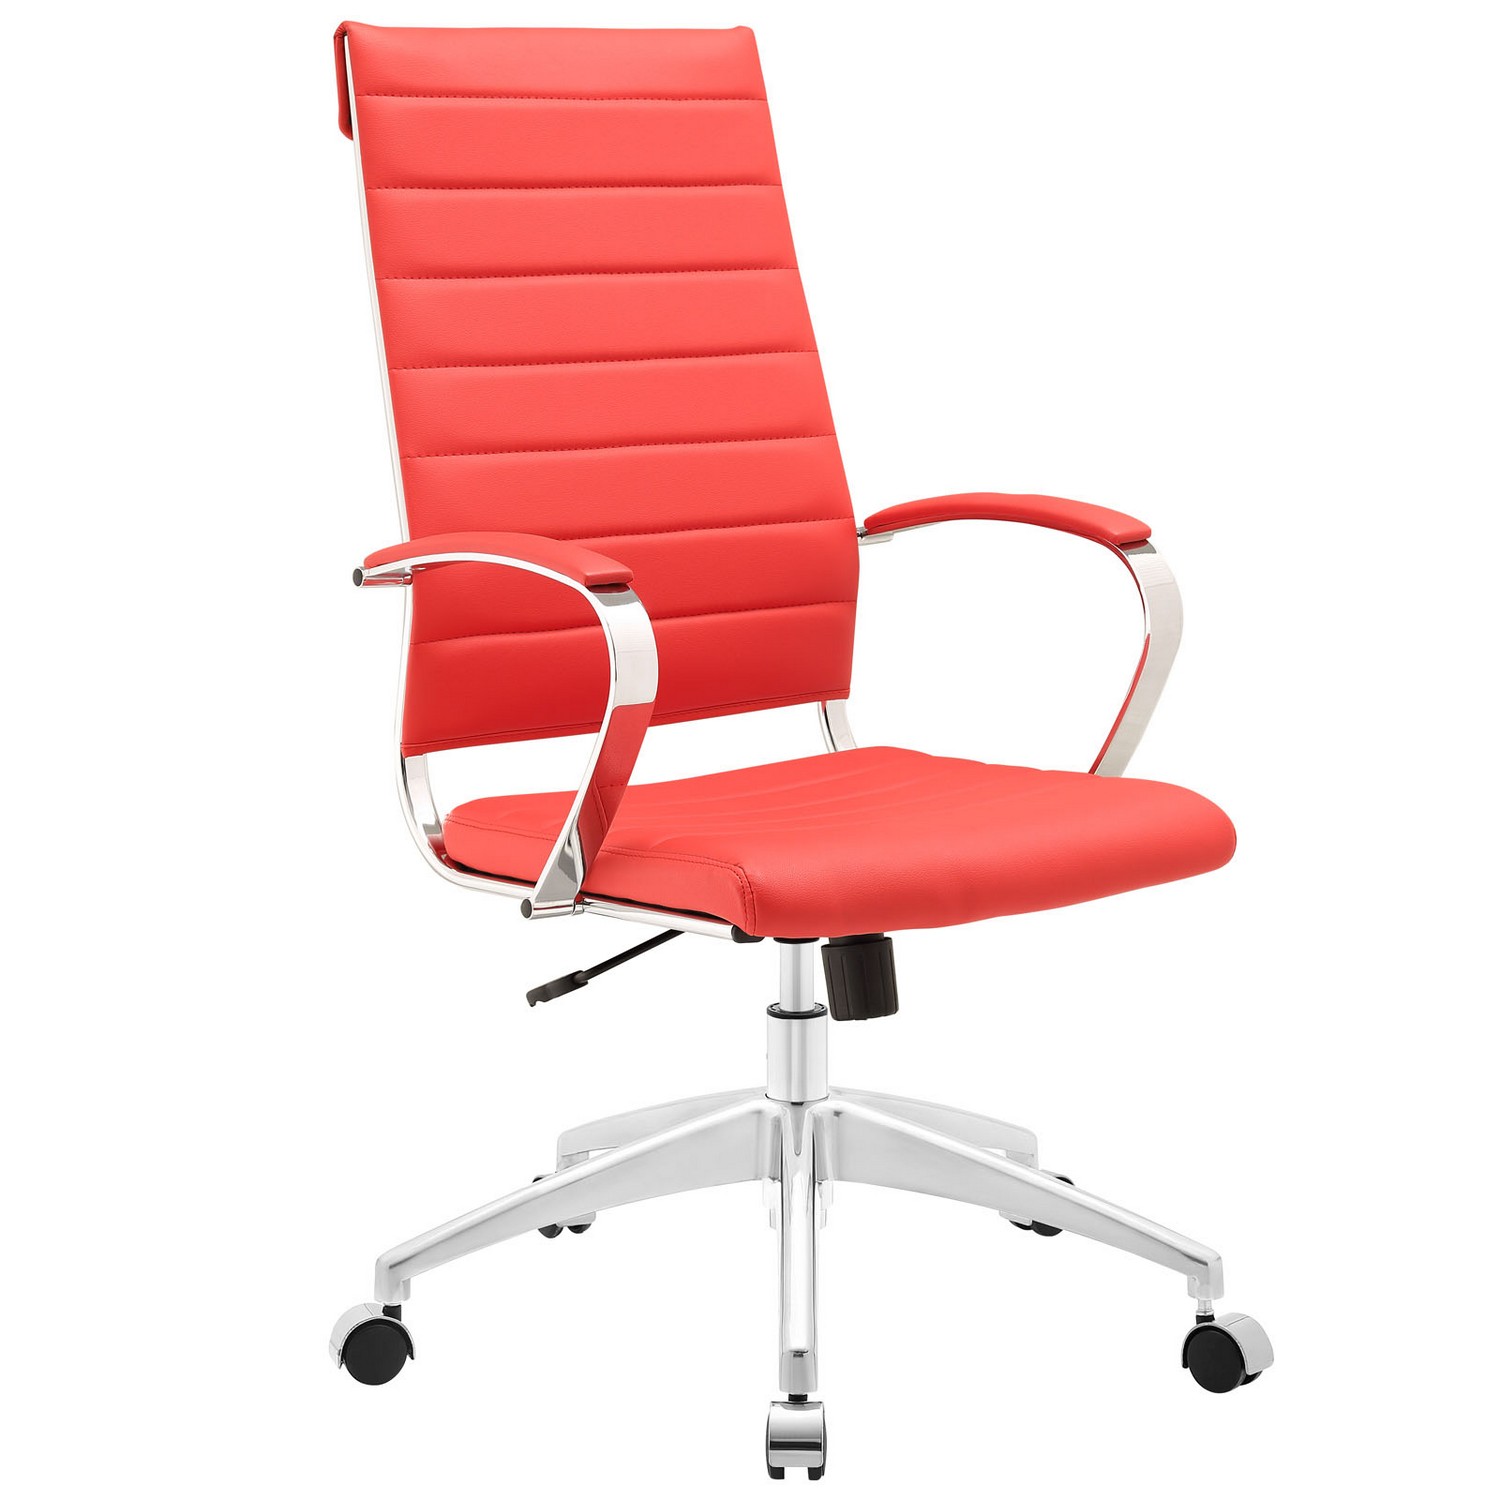 Modway Jive Highback Office Chair - Red